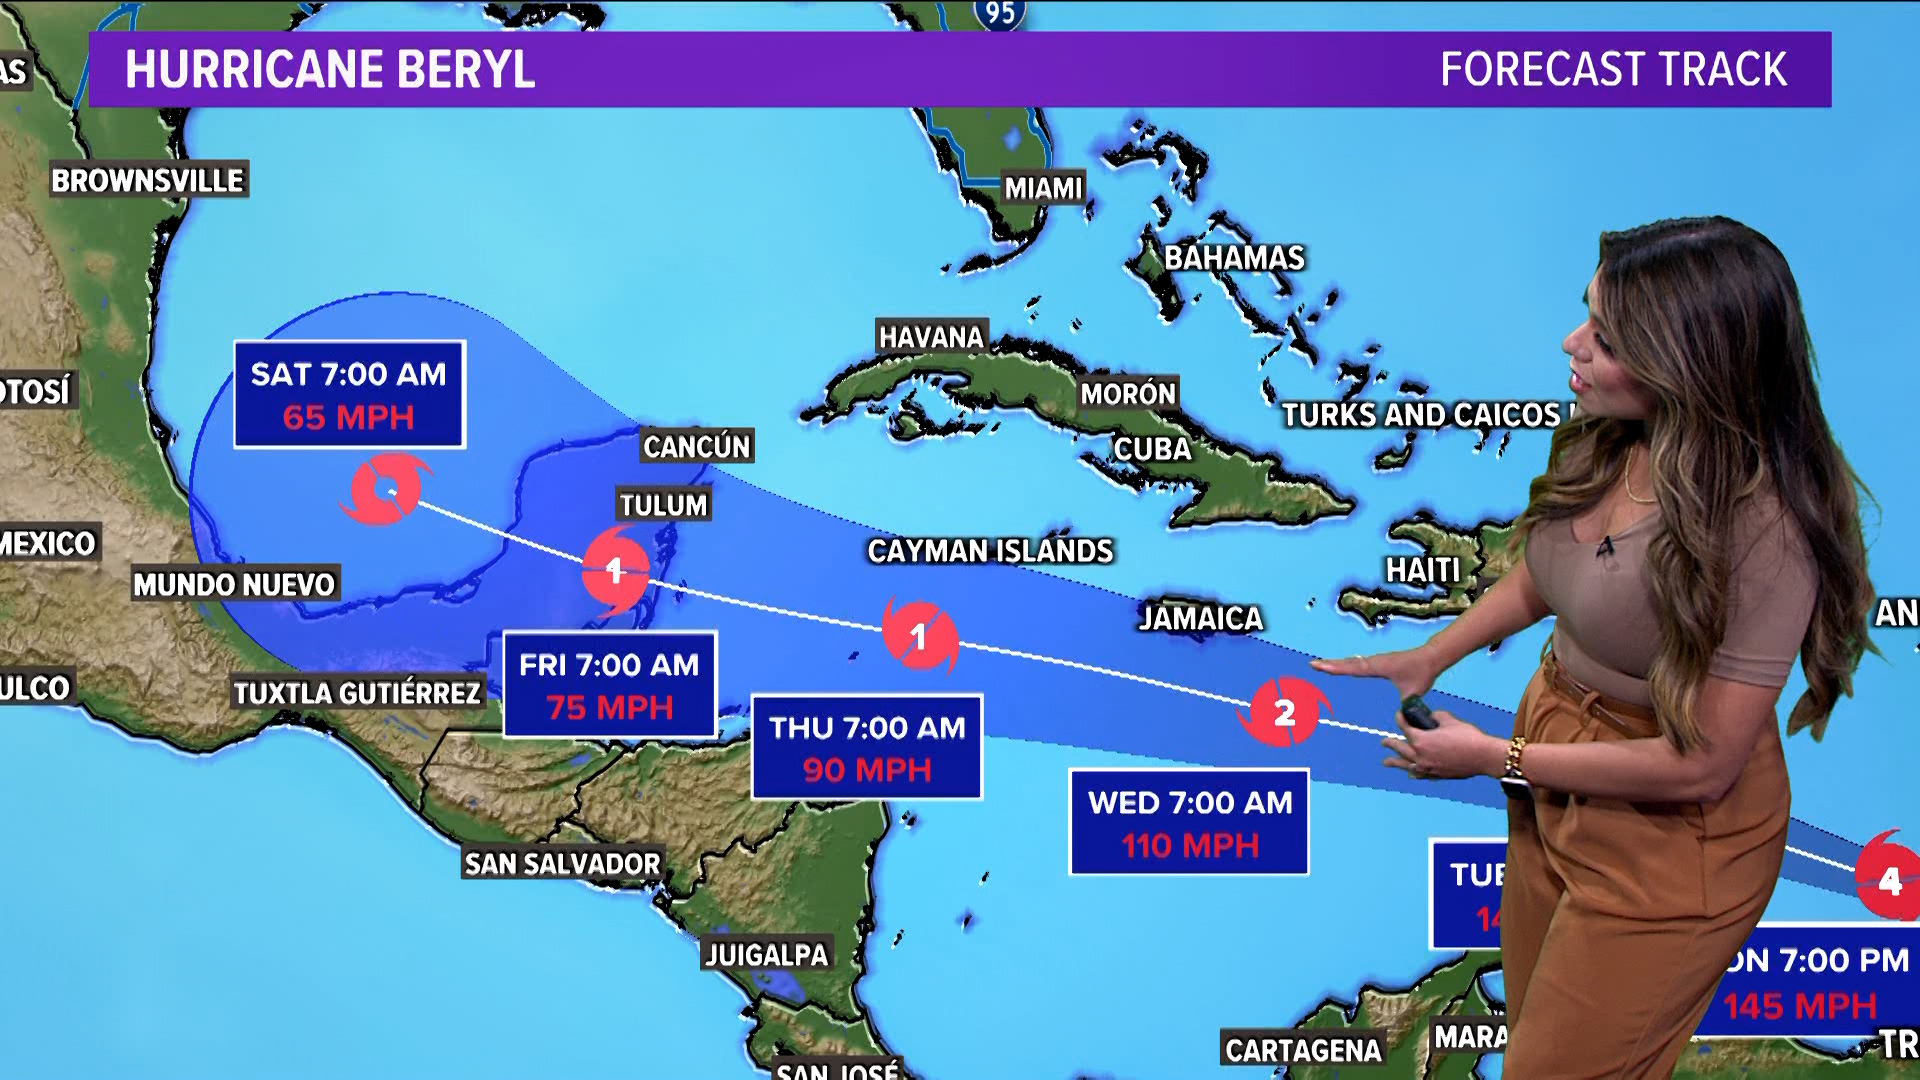 Hurricane Beryl strengthened to a Category 4 storm Monday near the Caribbean. Here's the latest forecast, path, spaghetti models and impacts.